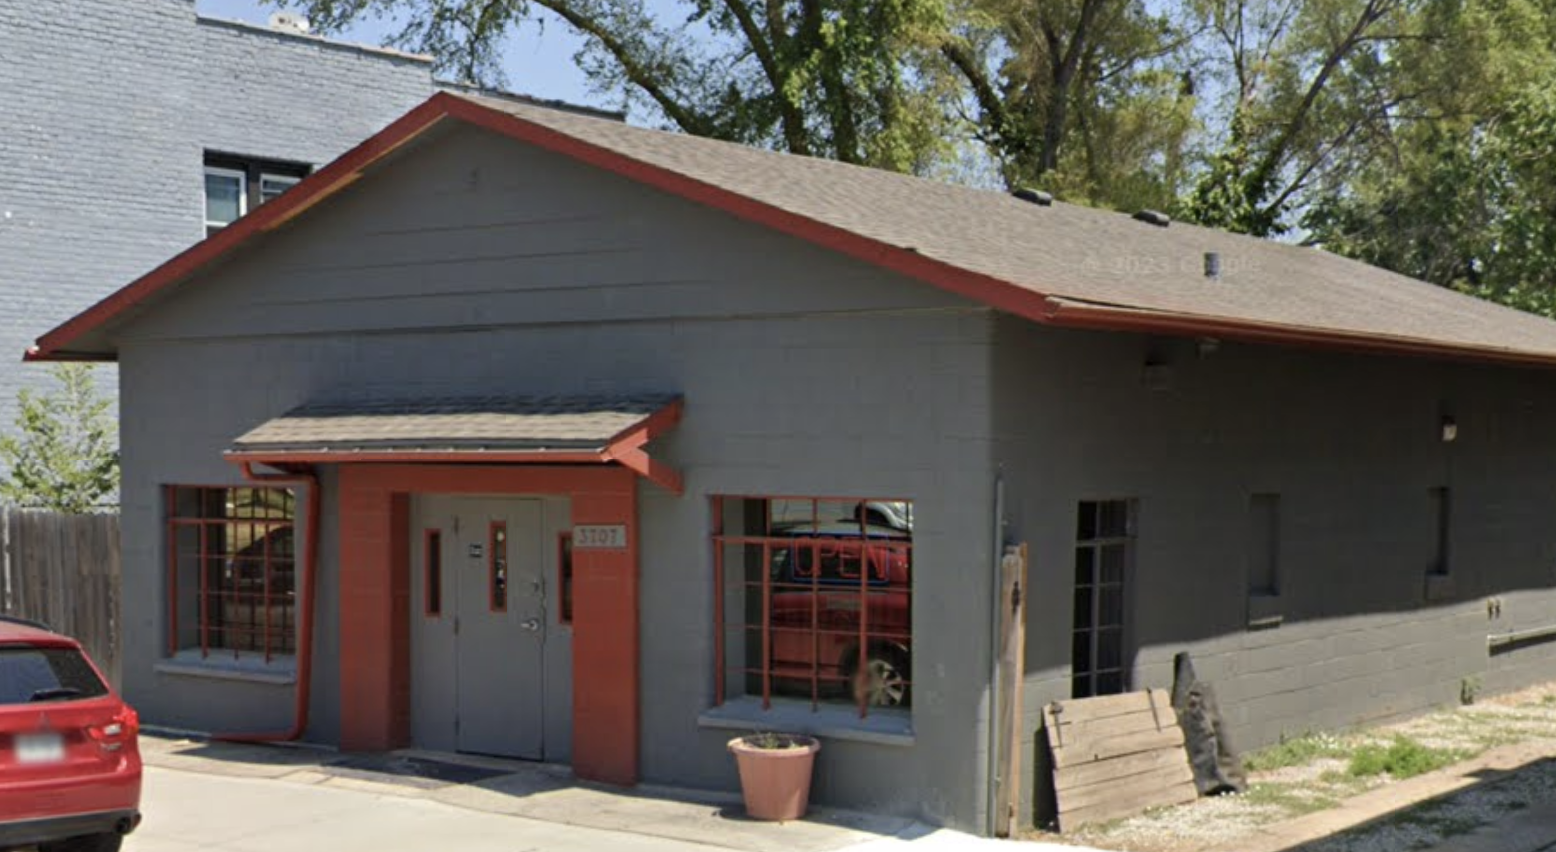 The Speedy Wee-Washette Laundry was located at 3707 N. 24th Streets in the 1940s and 1950s. Today this address is home to the Fraternity Barbershop.